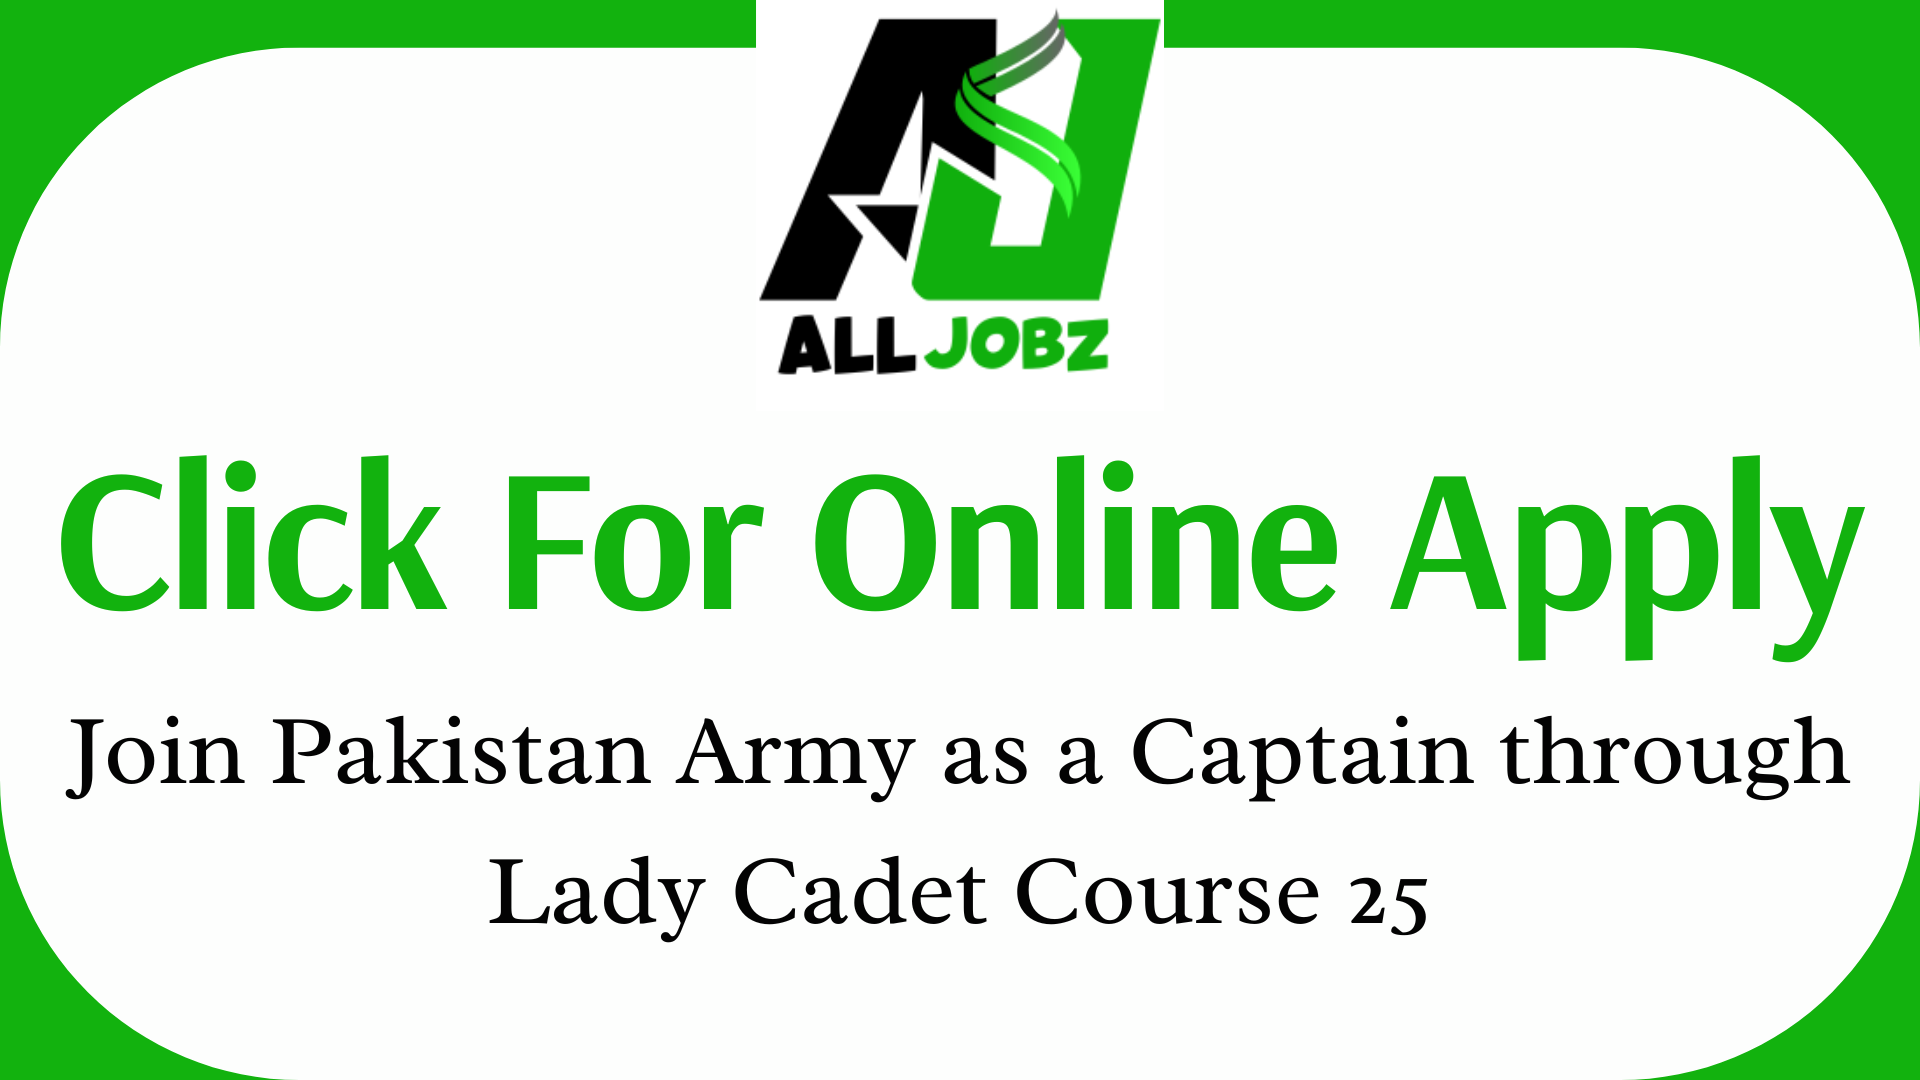 Join Pakistan Army As A Captain Through Lady Cadet Course 25, Pak Army Online Apply 2024, Pak Army Online Apply Matric Base, Join Pak Army As Captain, Pak Army Jobs 2024 Online Apply For Male, Join Pak Army Online Registration 2024 For Females, Join Pak Army Roll Number Slip Download, Pak Army Result Check Roll Number Slip, Join Army Online Registration,